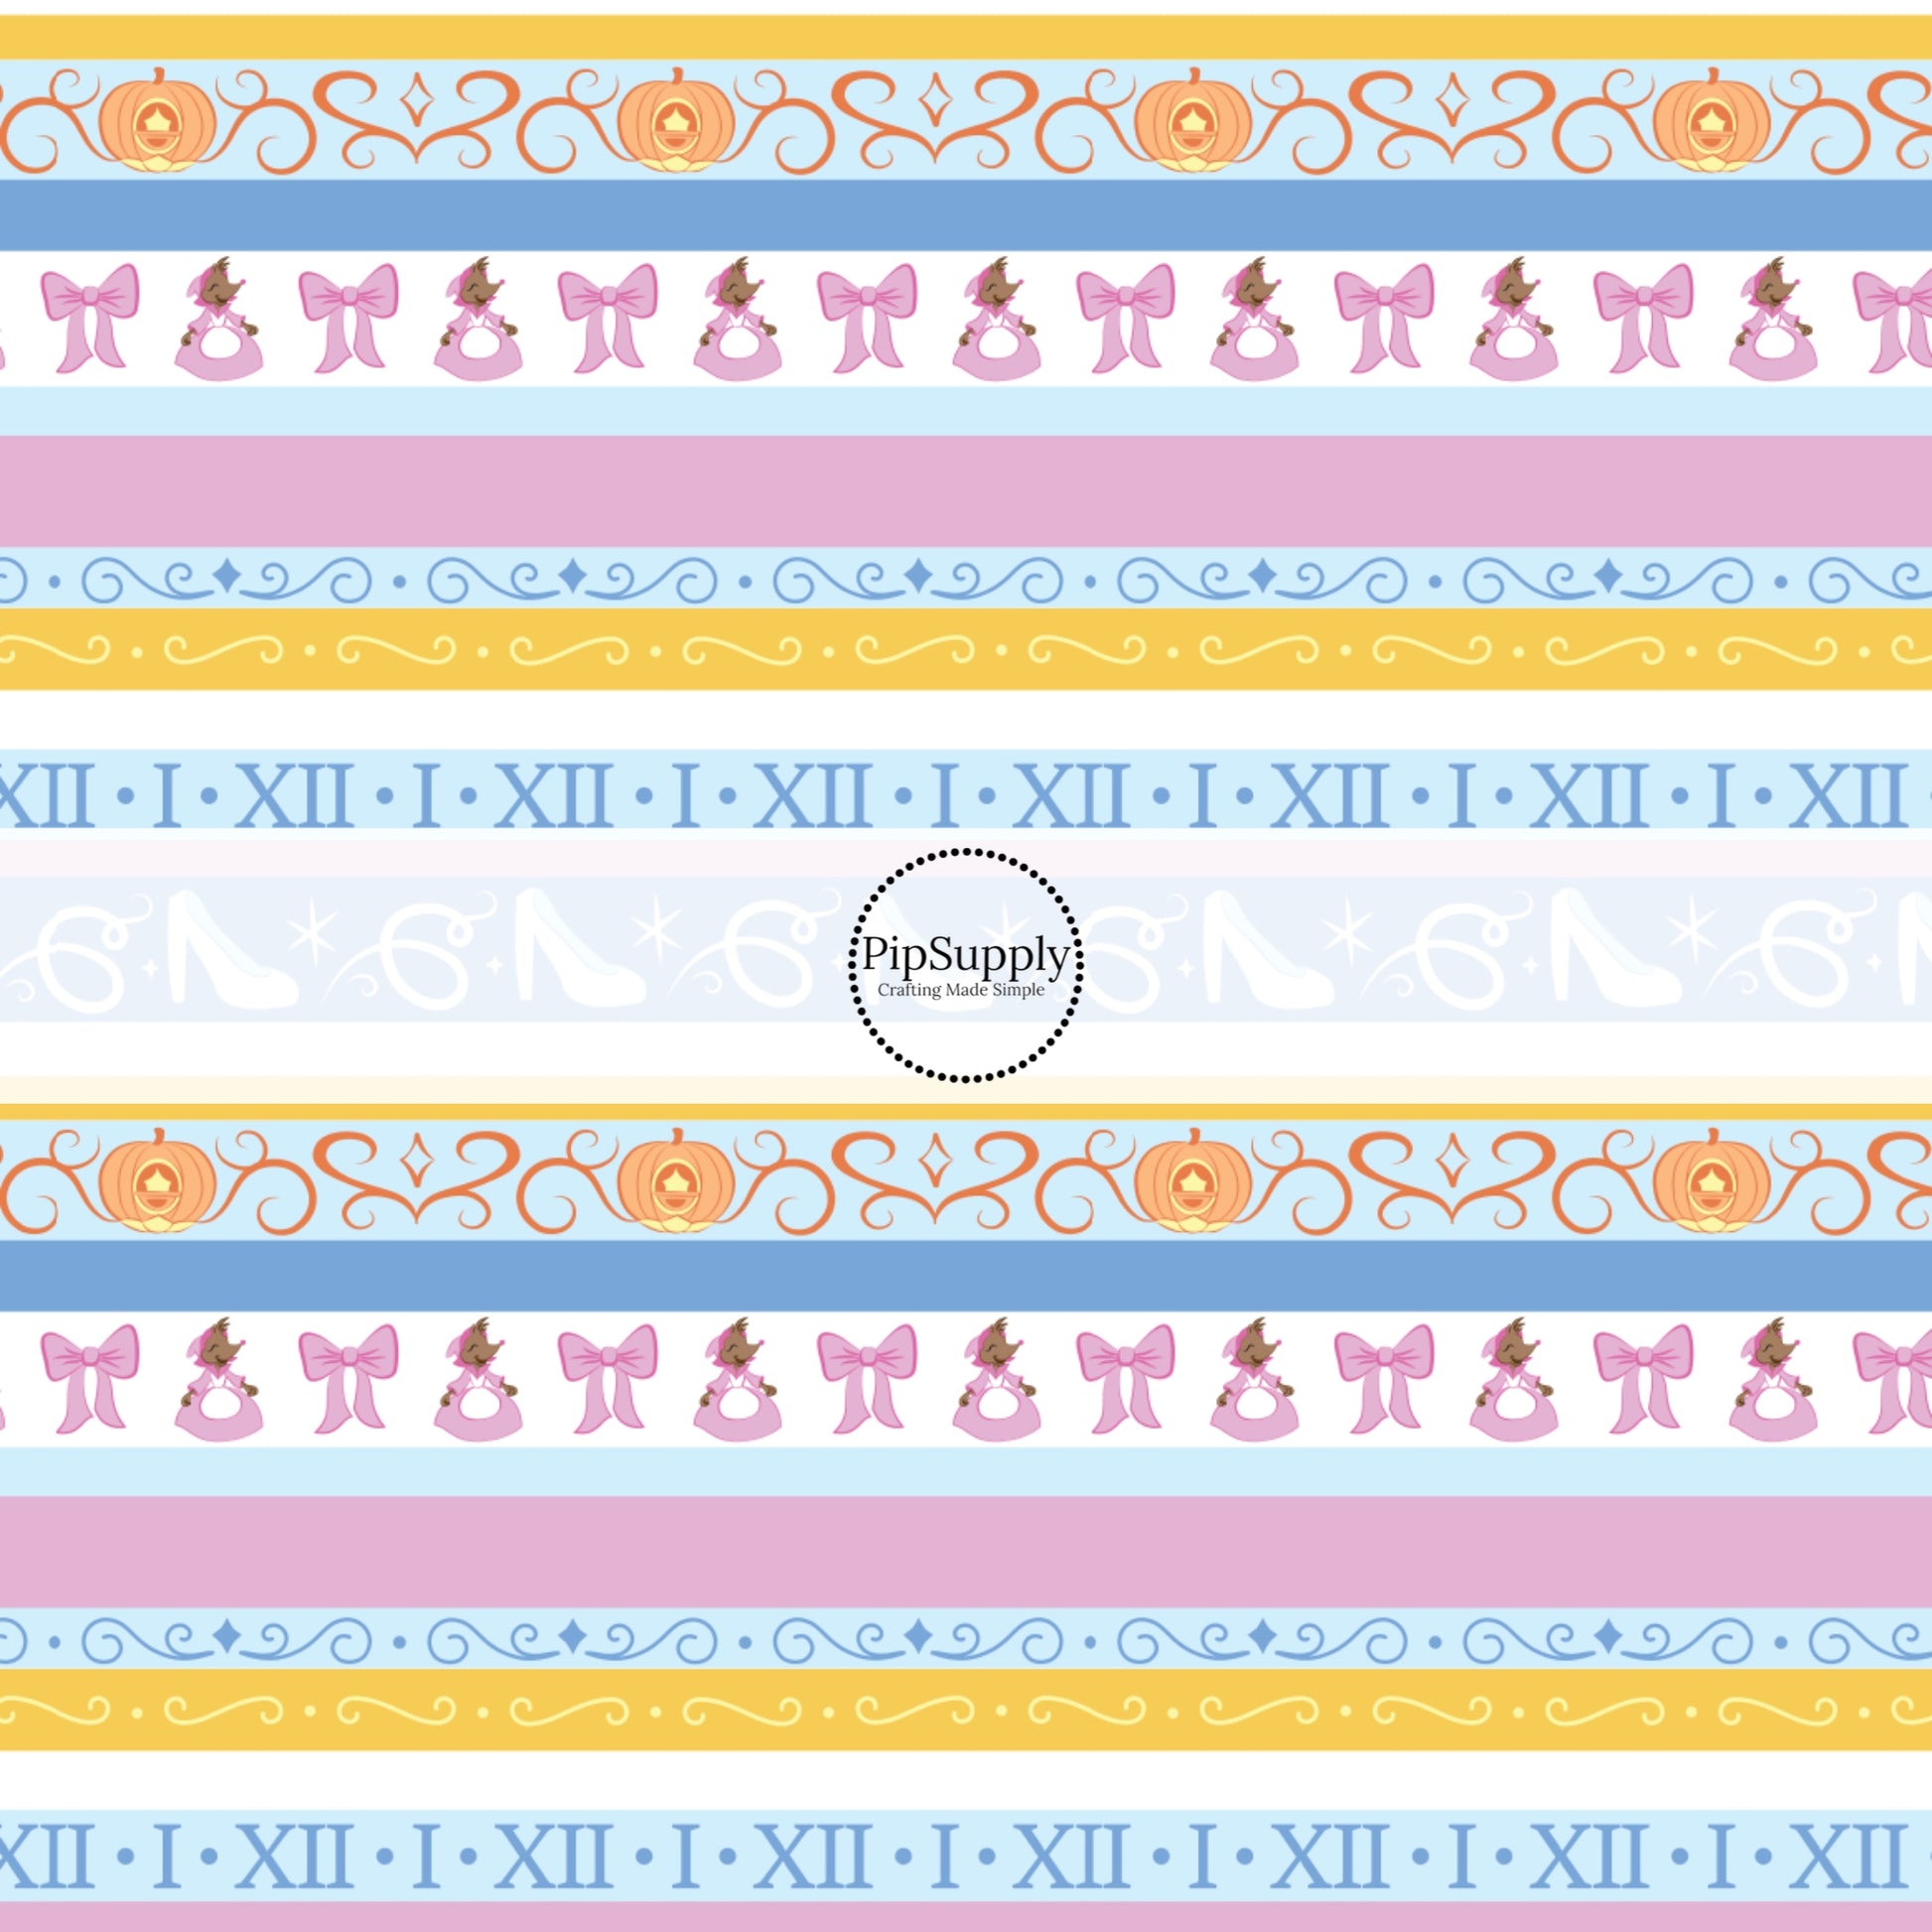 Pumpkin carriage, glass slipper, mouse maid, and swirls on blue and pink stripes hair bow strips